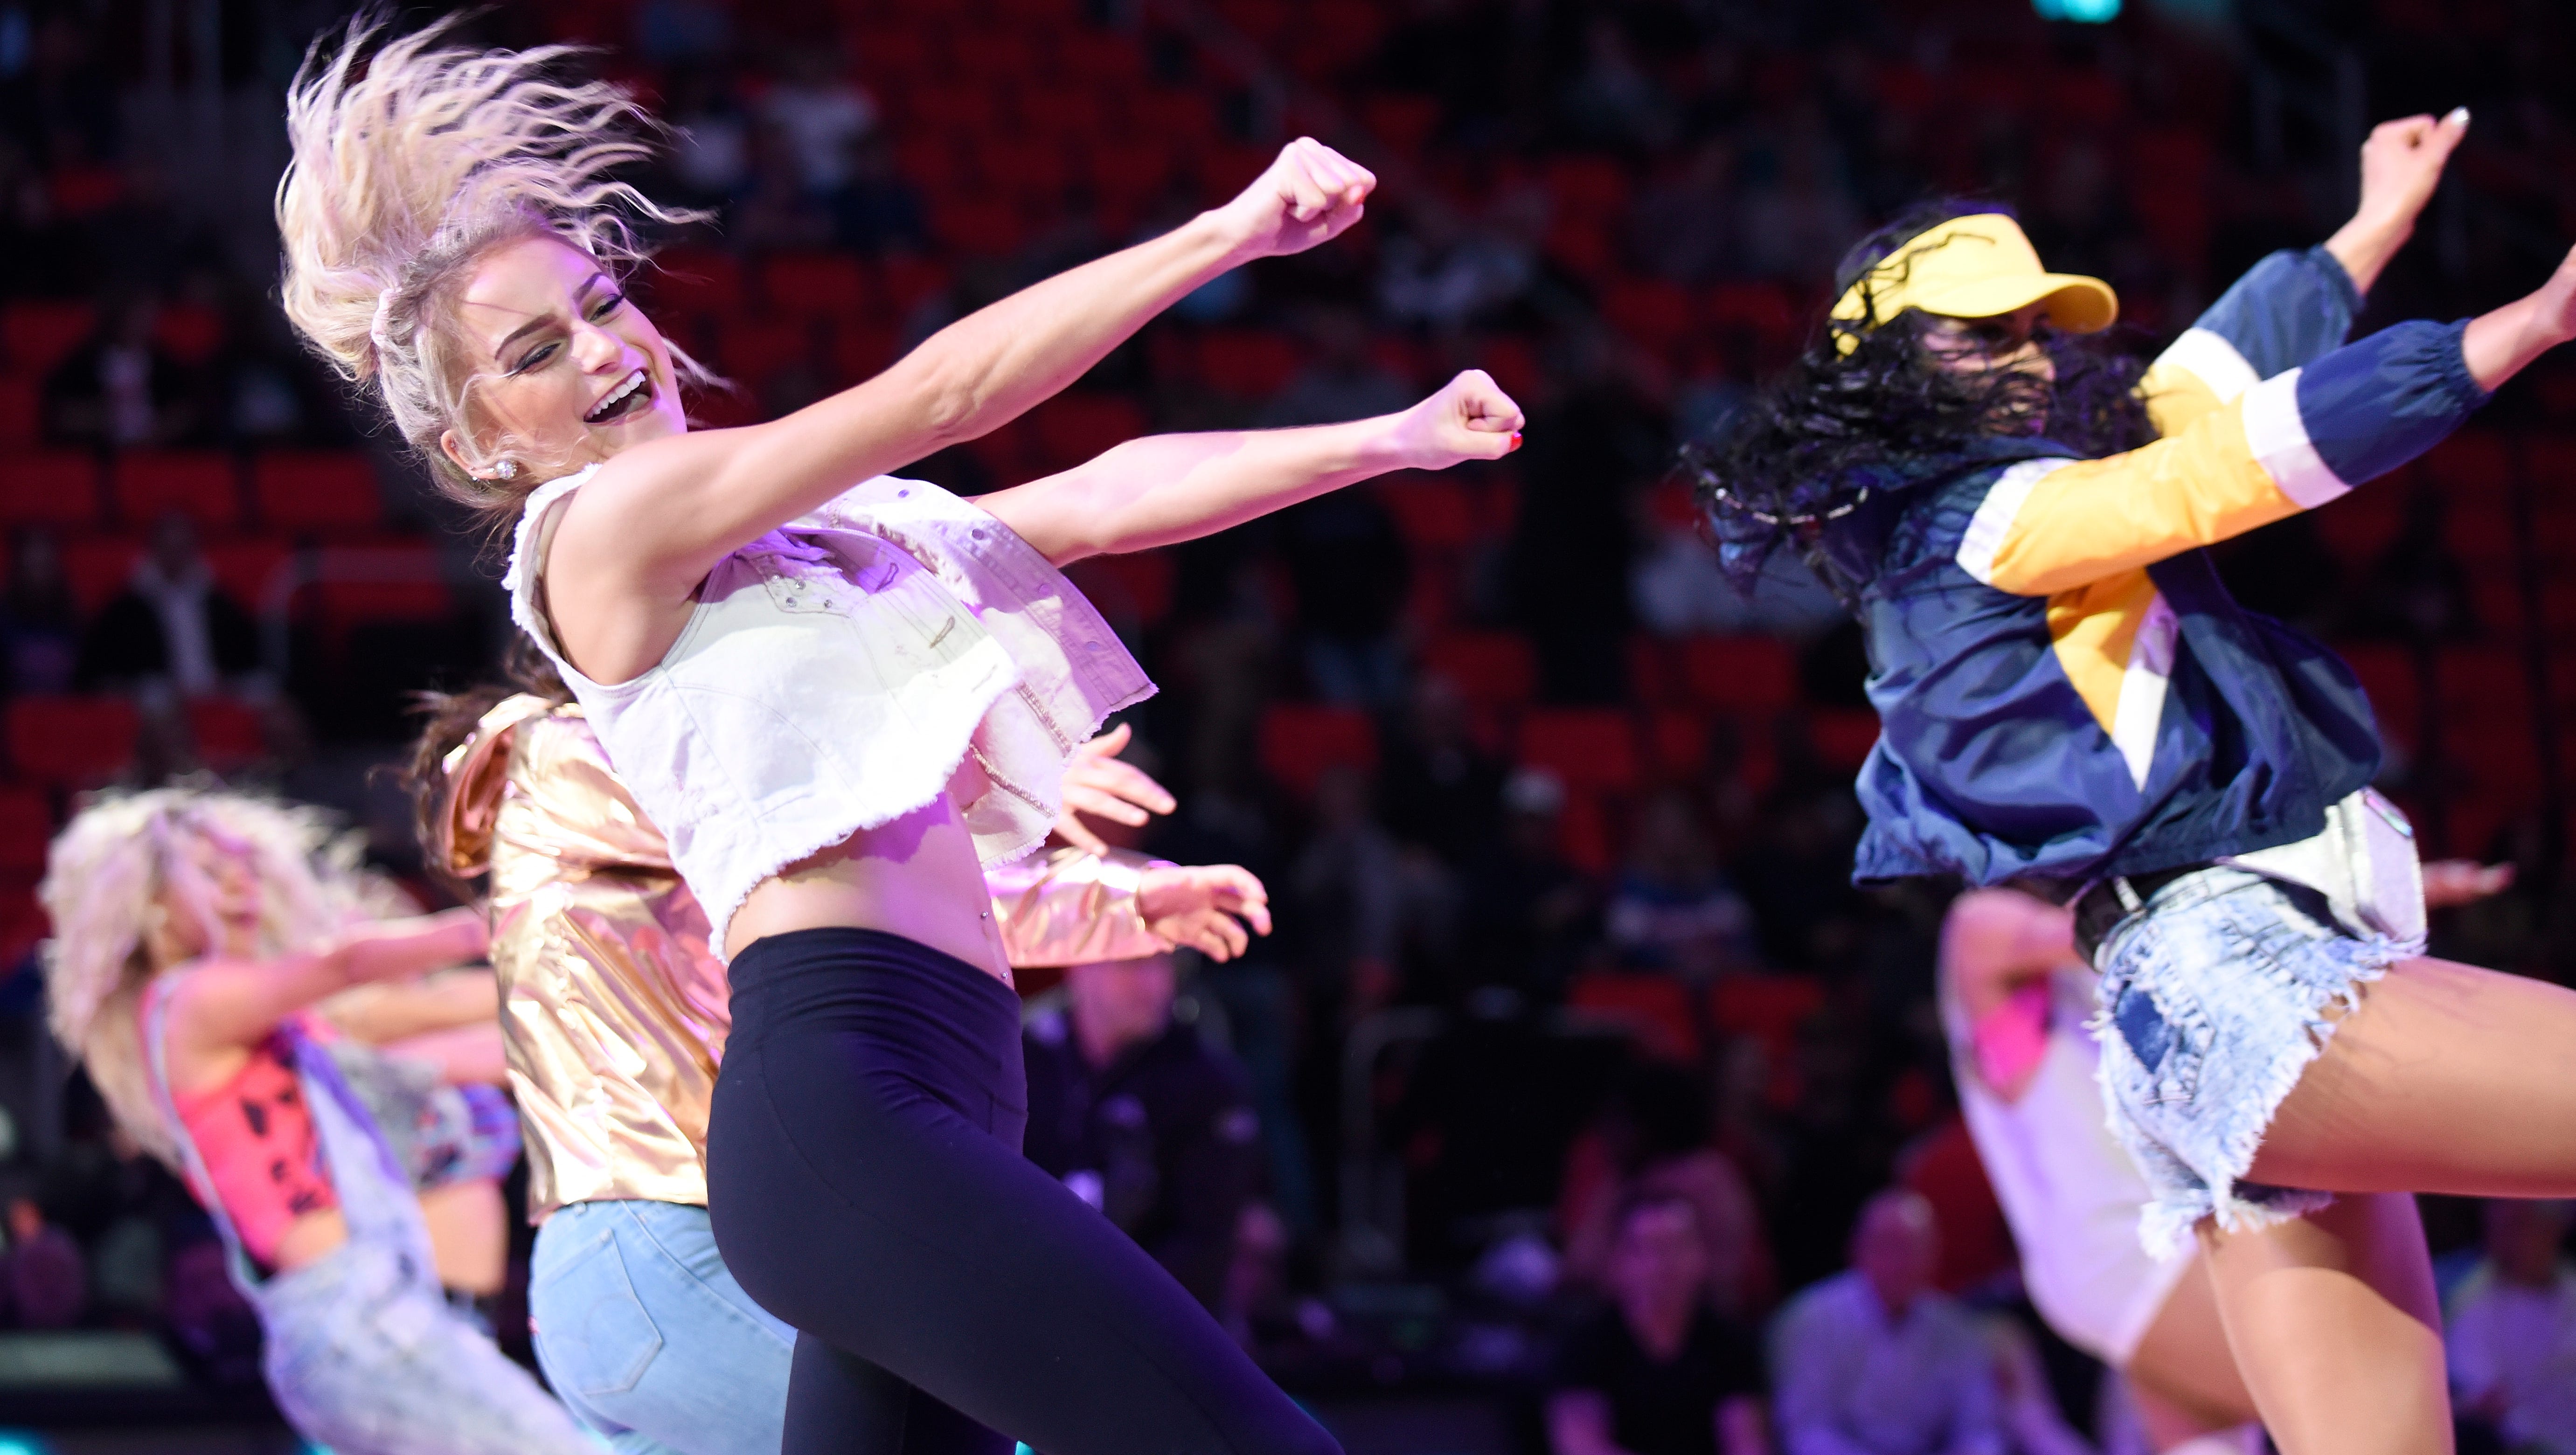 Pistons Dancers performed in the second quarter.